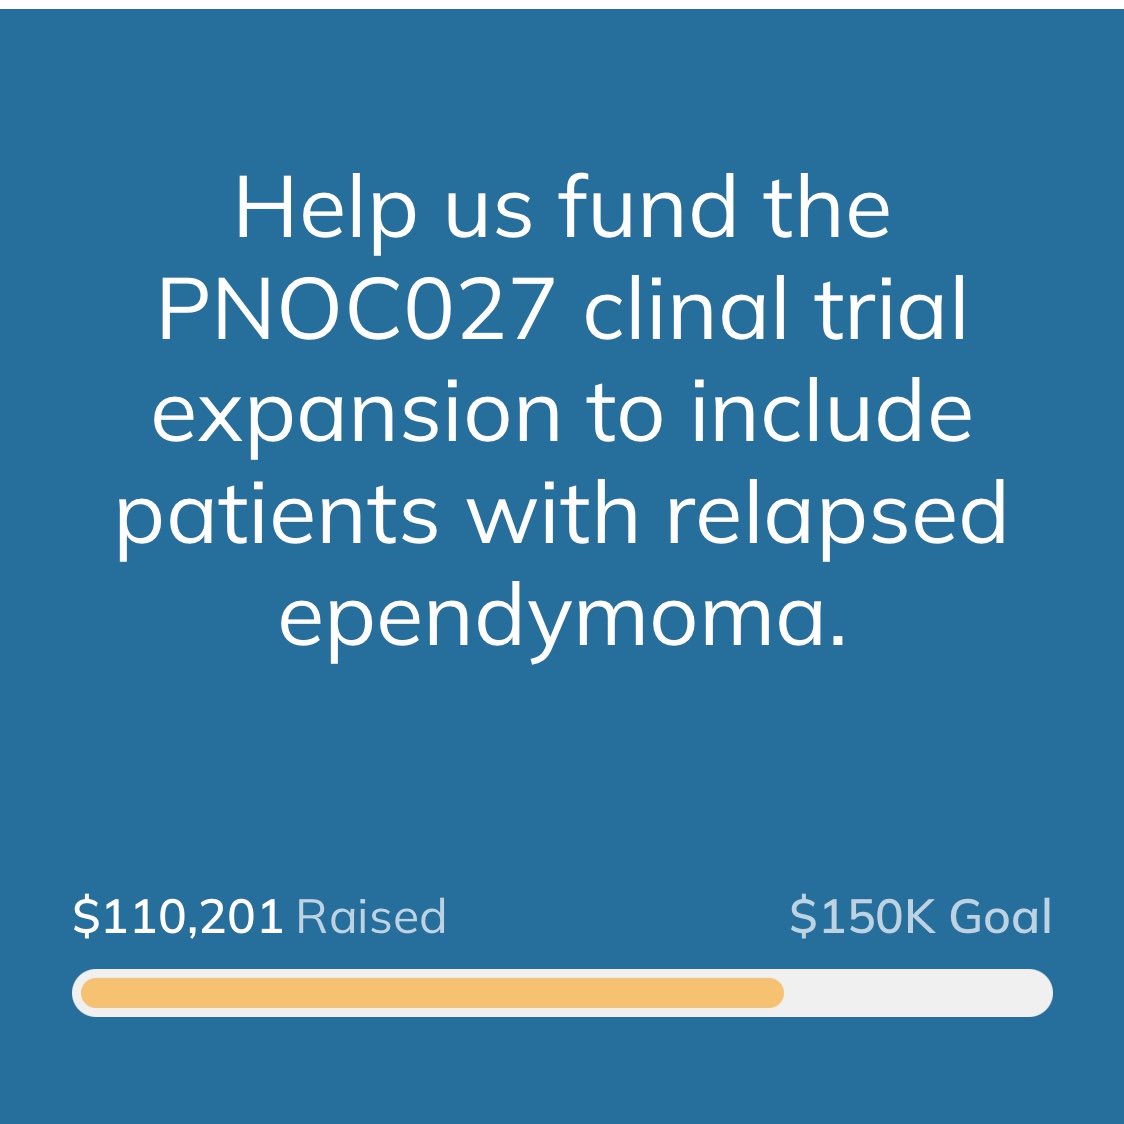 PNOC027 offers new hope for children with relapsed ependymoma. Please consider an end-of-year gift toward this exciting new clinical trial. Together we can change the course of history for children with #Ependymoma 💛 fundraising.pnocfoundation.org/campaign/pnoc0…